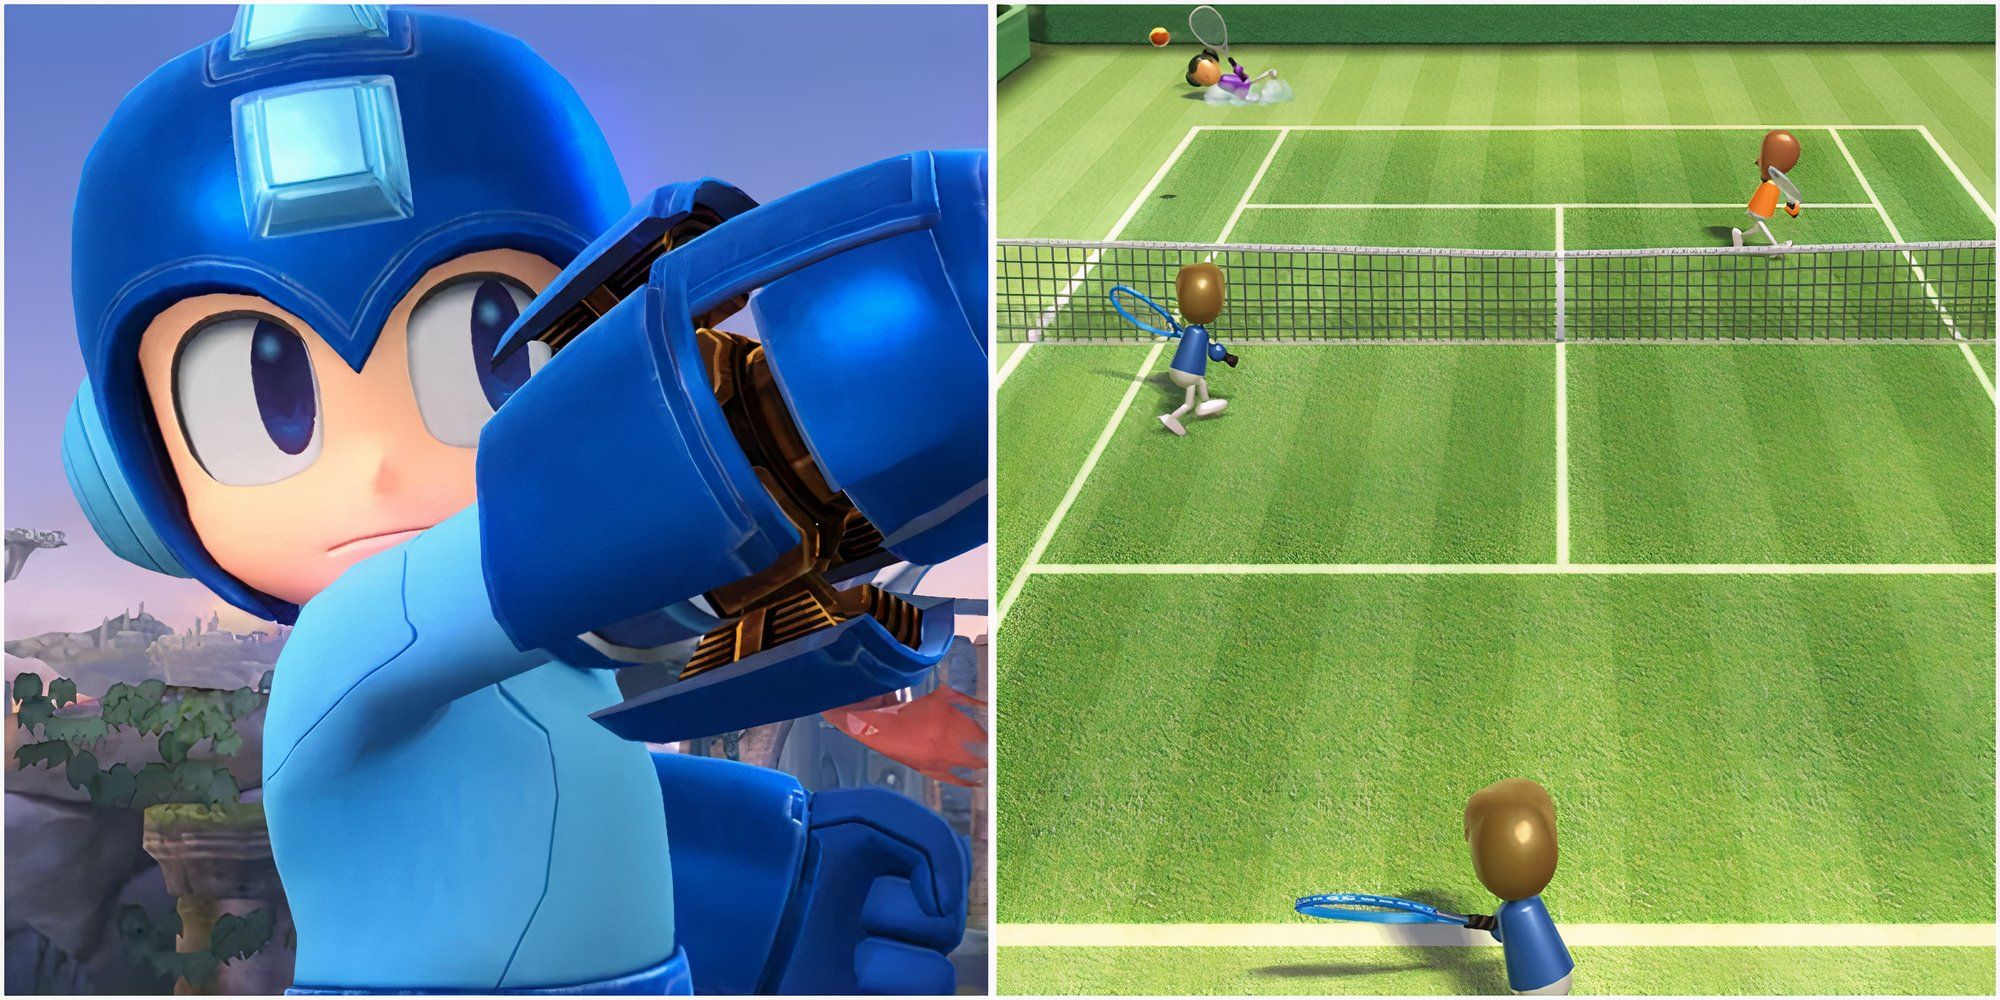 Mega Man in Super Smash Bros (2014) and Playing Tennis in Wii Sports